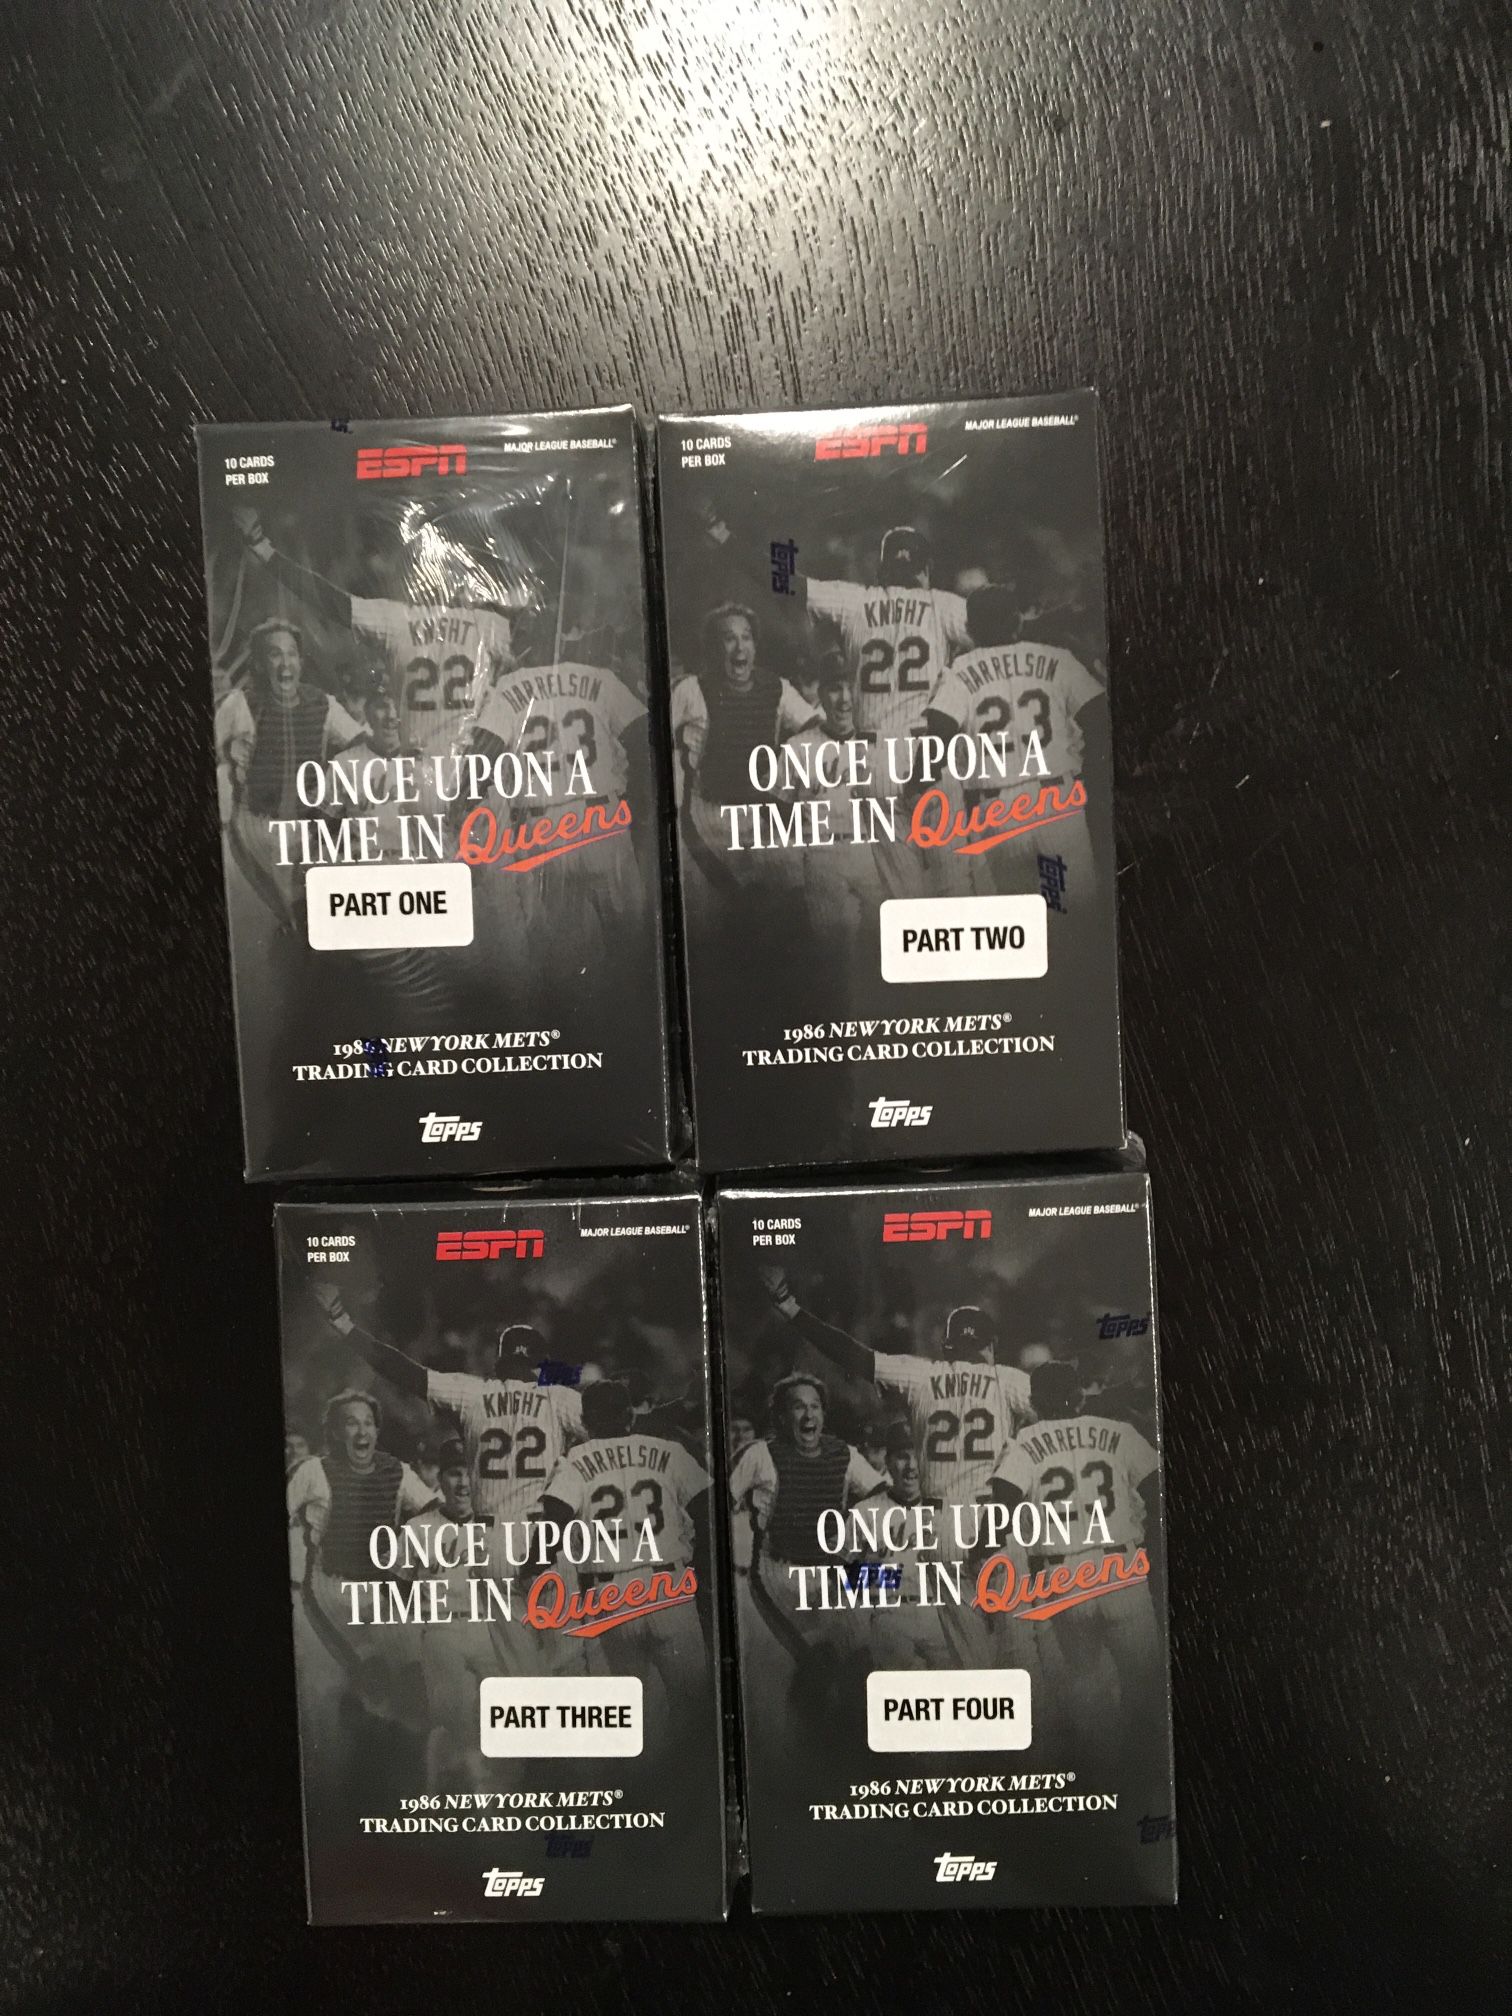 2021 Topps x ESPN 30for30 - “Once Upon a Time in Queens” Part 1-4